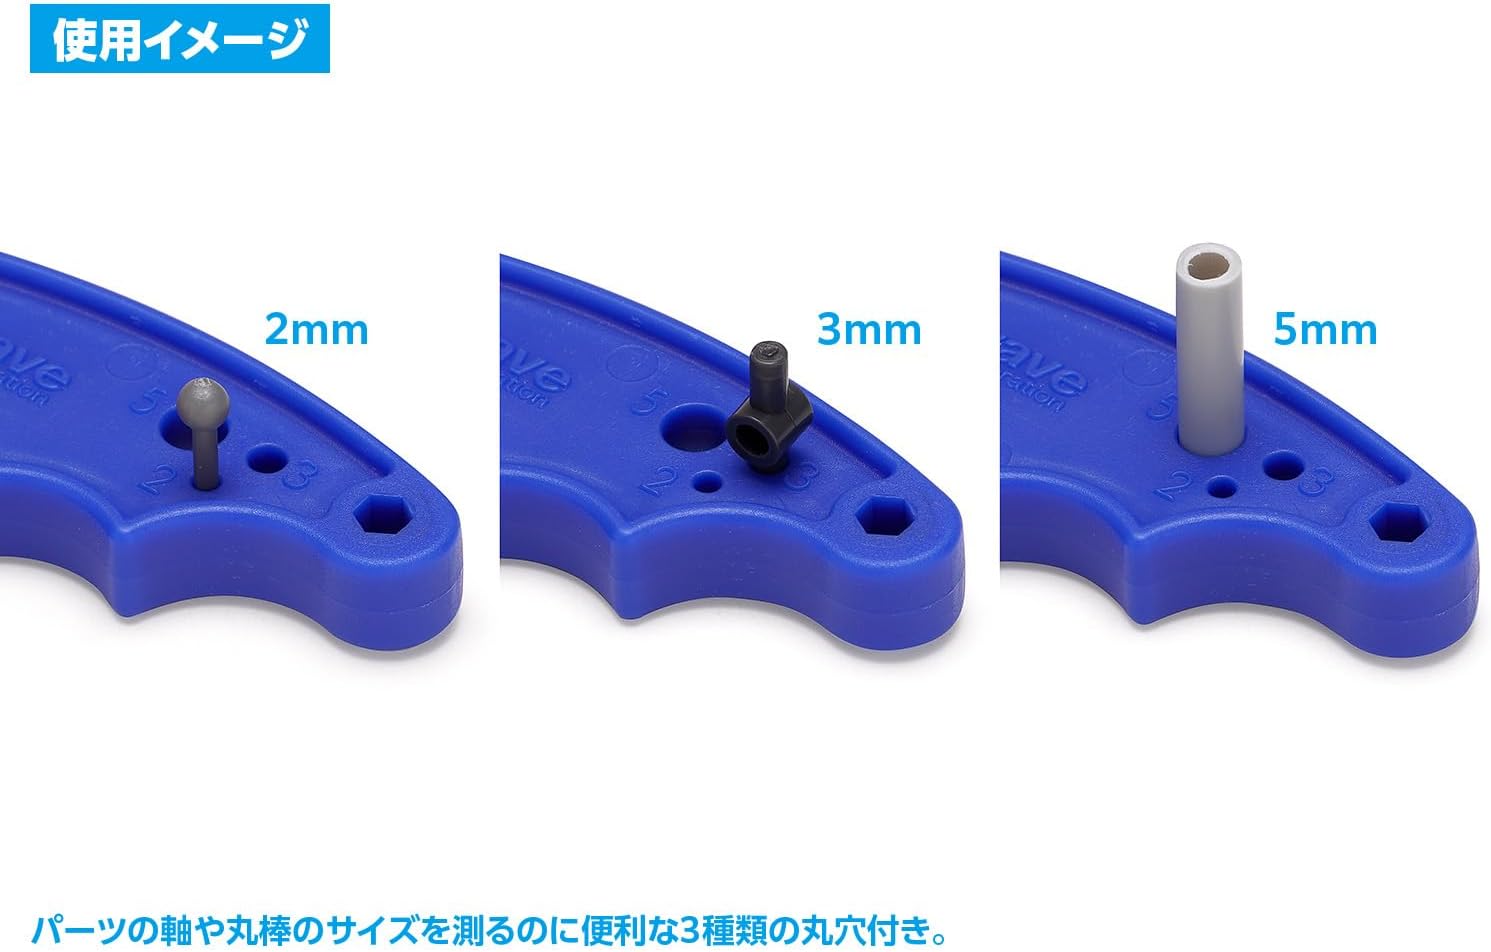 Wave HT220 Hobby Tool Series Parts Opener V2 (Blade Width: 0.2 inches (5 mm) Plastic Model Tool - BanzaiHobby